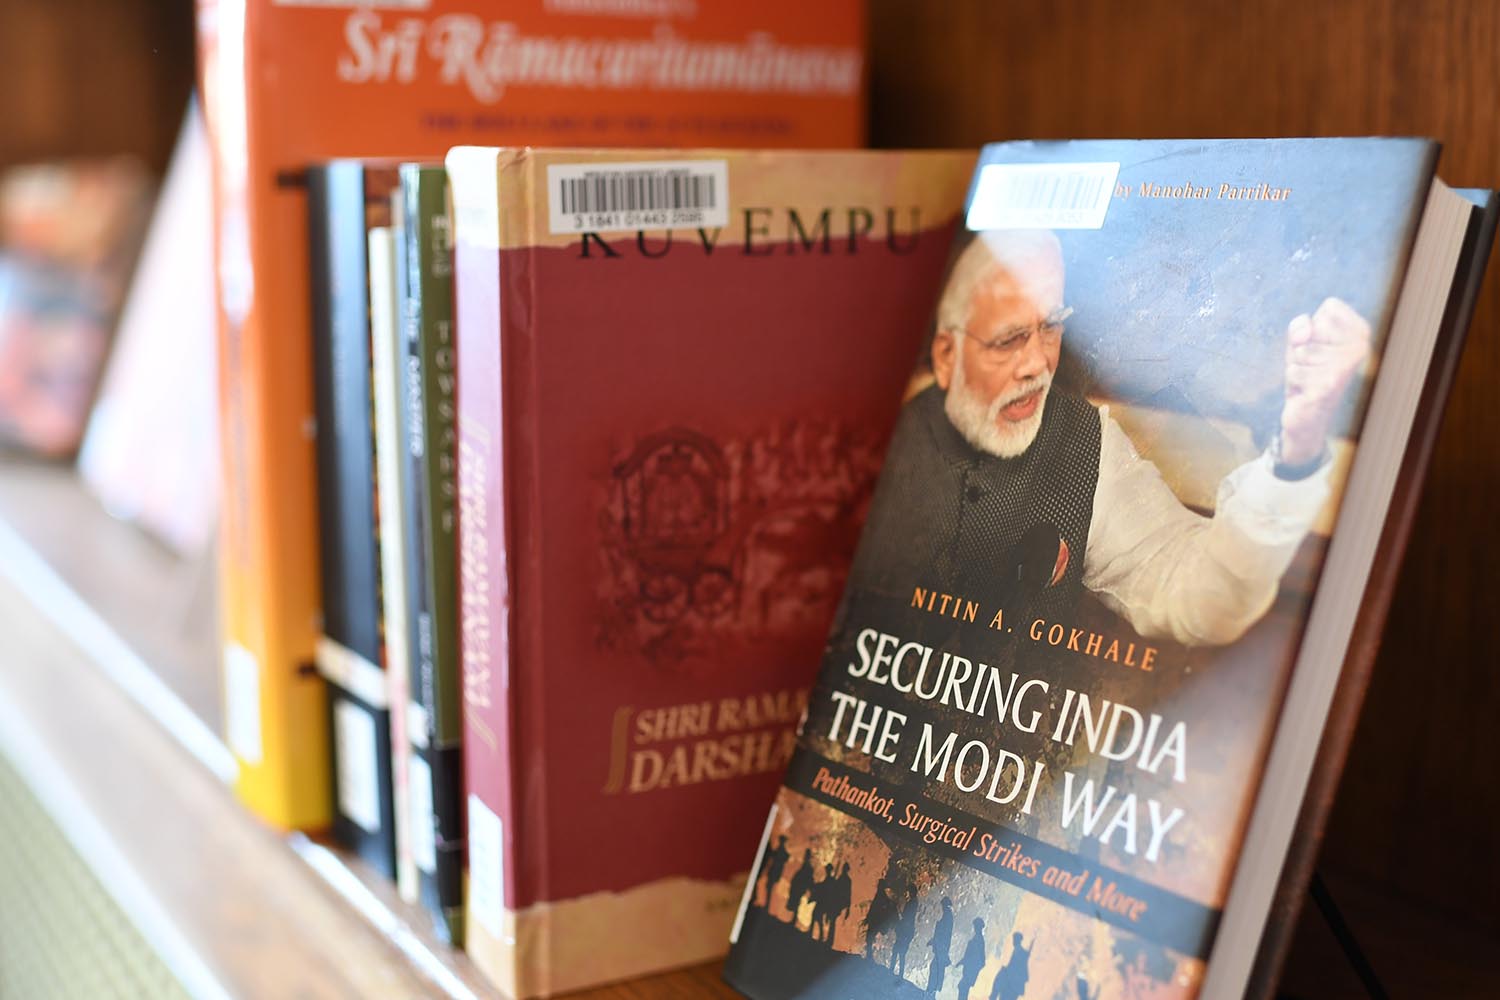 Securing India the Modi Way, by Nitin Gokhale, is one of the 33 books donated by the General Consul of India, New York. 